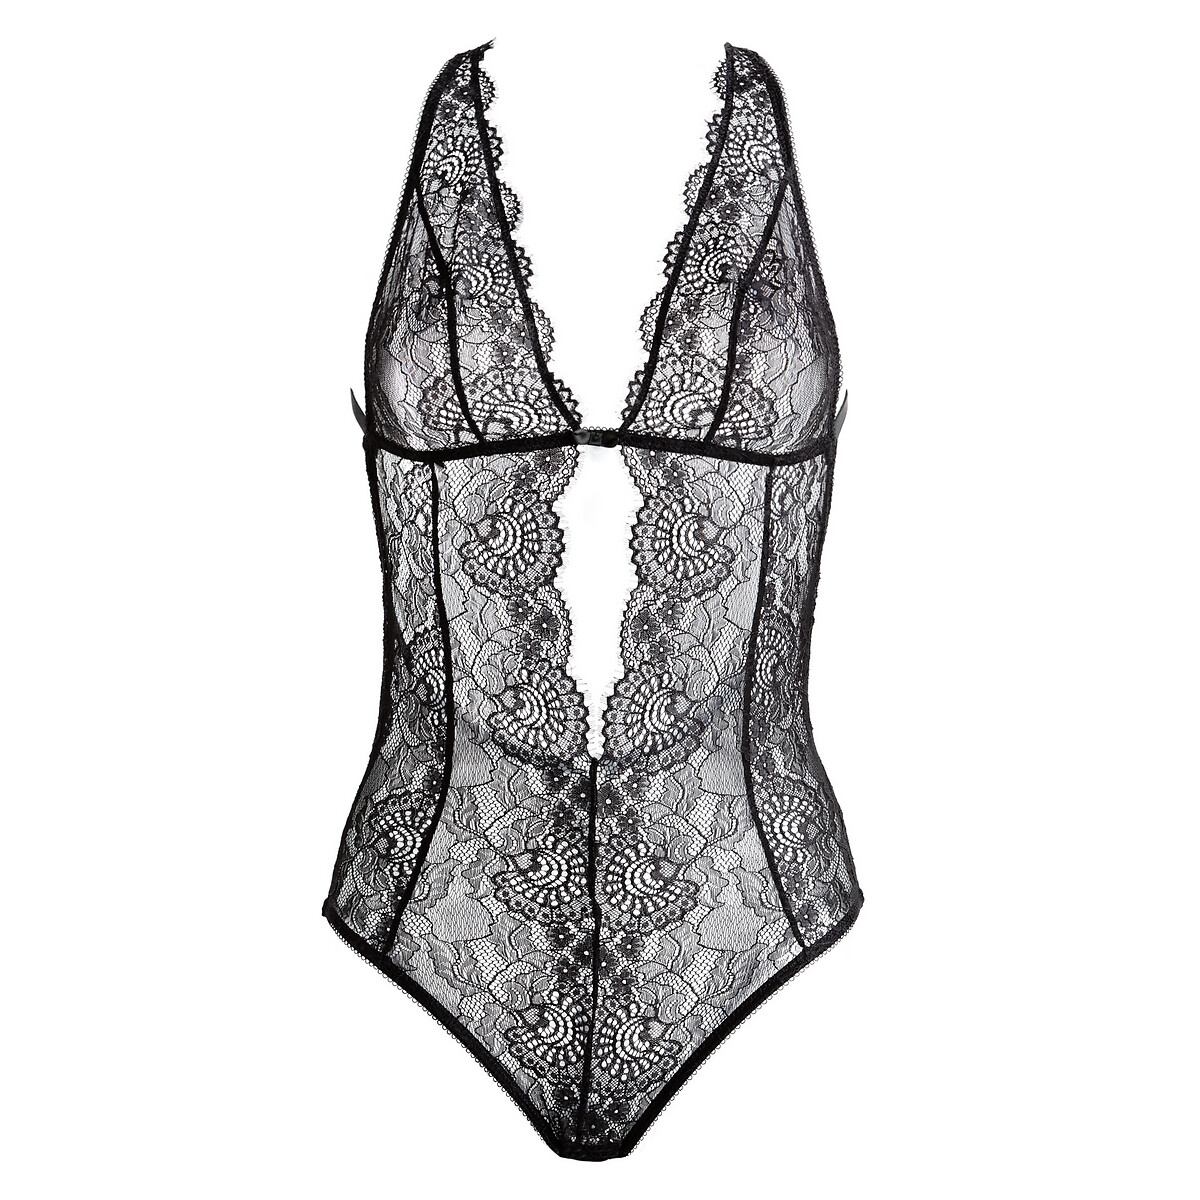 Lace Crotchless Thong Bodysuit